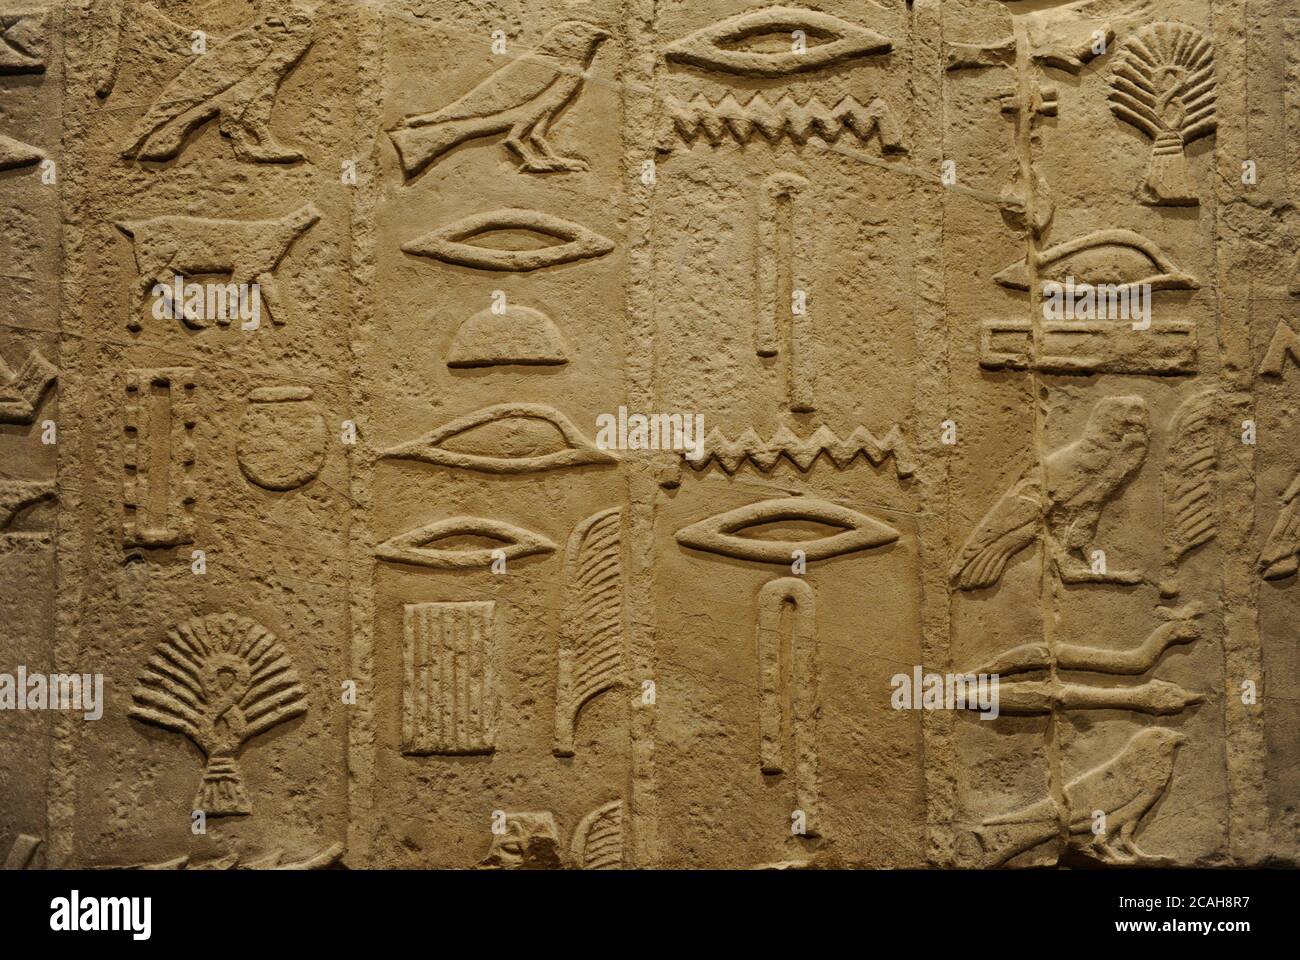 Ancient Egypt. Detail of hieroglyphic inscriptions on the burial chamber of the Methen or Metjen (high official). 4th Dynasty, c. 2575 BC. Limestone. Mastaba 6. Necropolis of north Sakkara. Old Kingdom. Neues Museum (New Museum). Berlin, Germany. Stock Photo